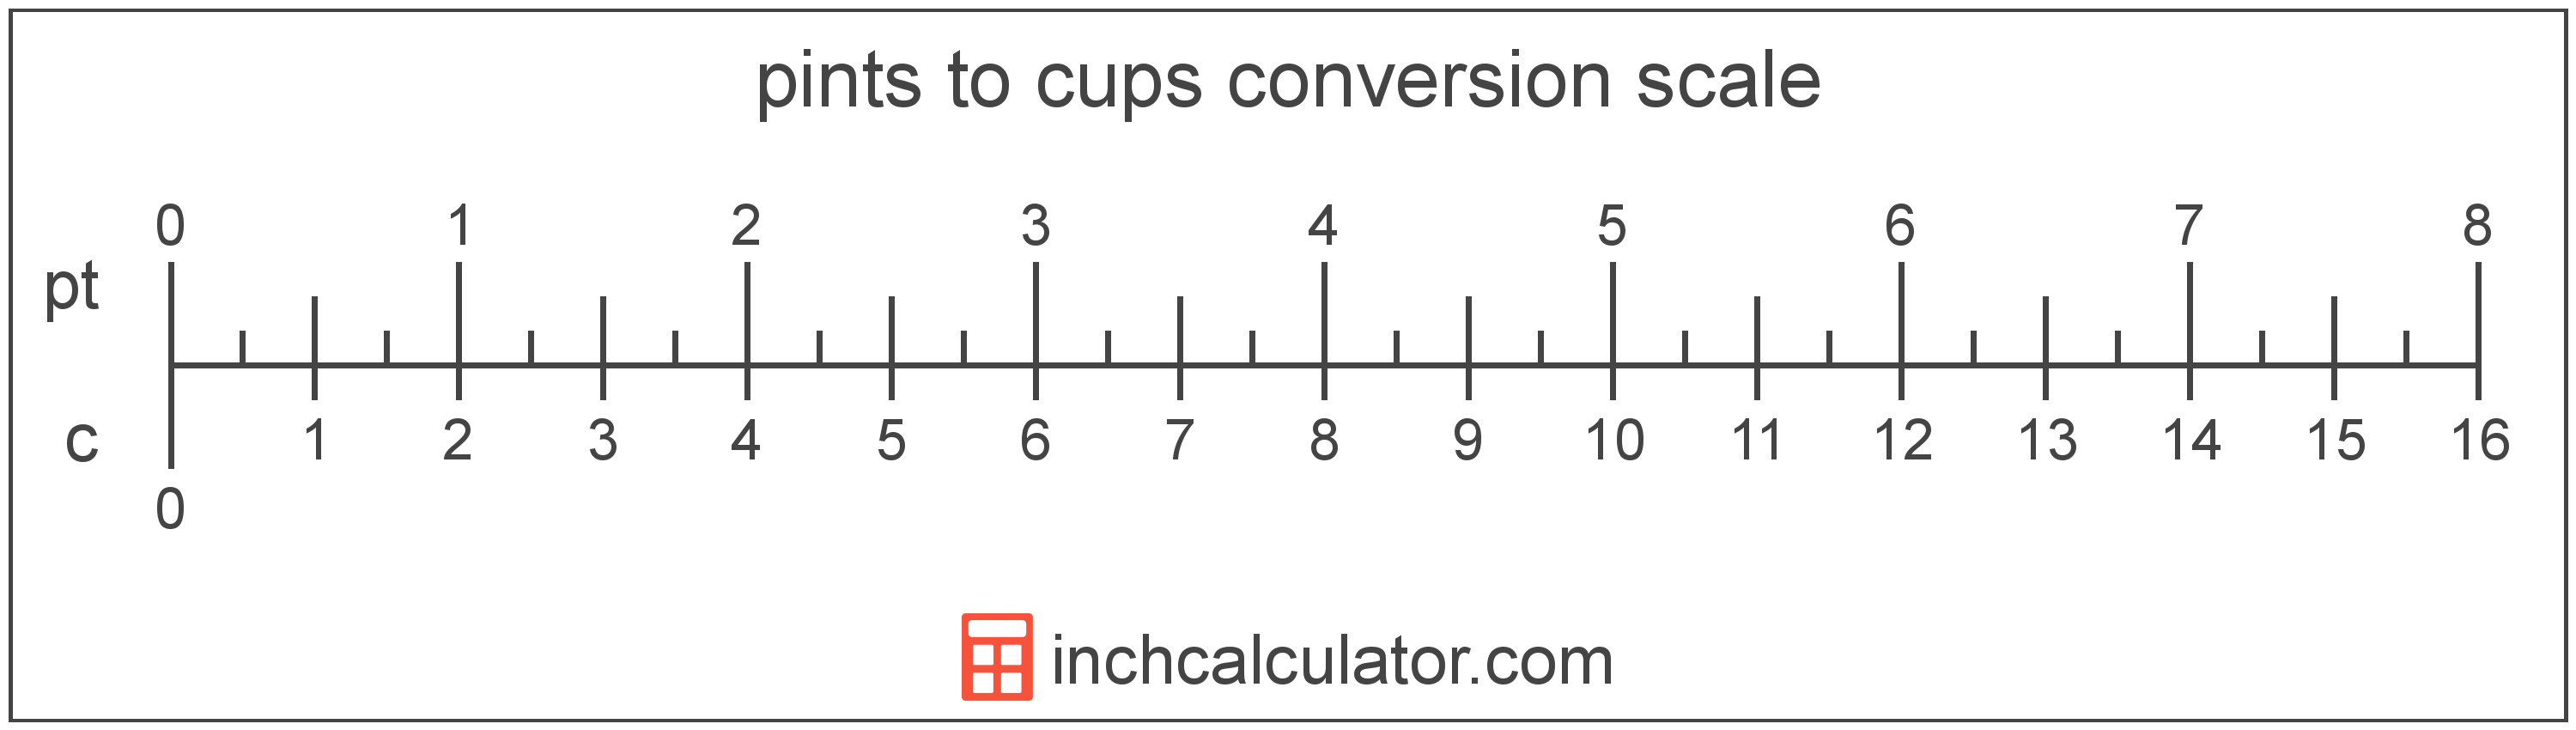 https://www.inchcalculator.com/a/img/unit-conversion/pint-to-cup-conversion-scale.png